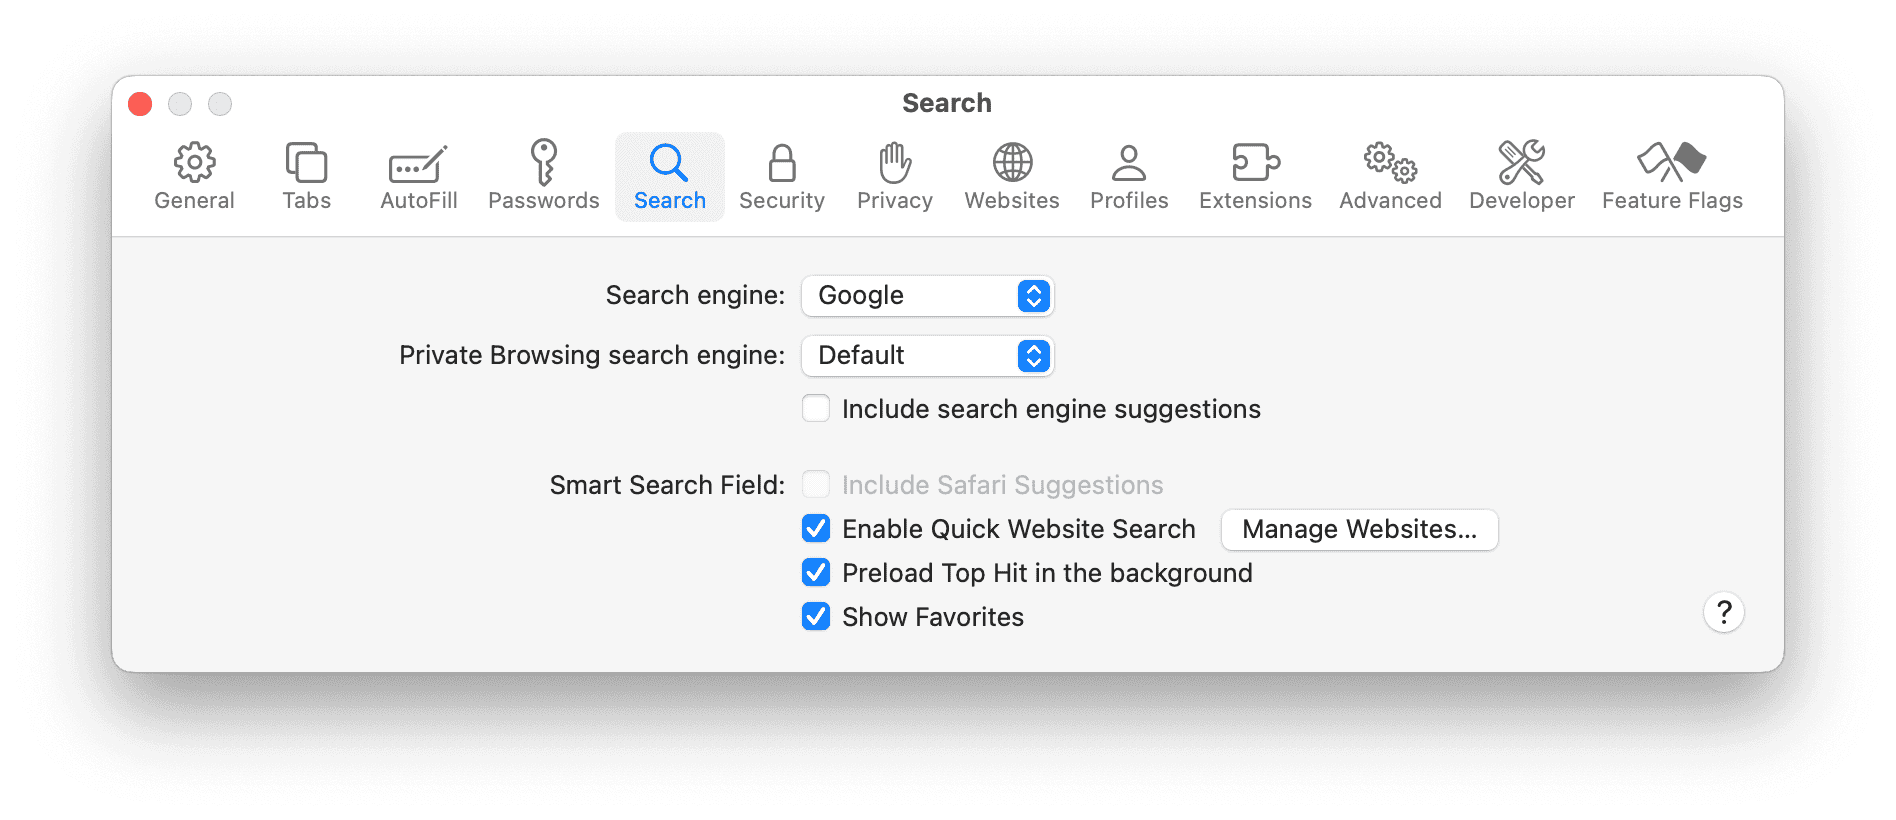 Disable include search engine suggestions